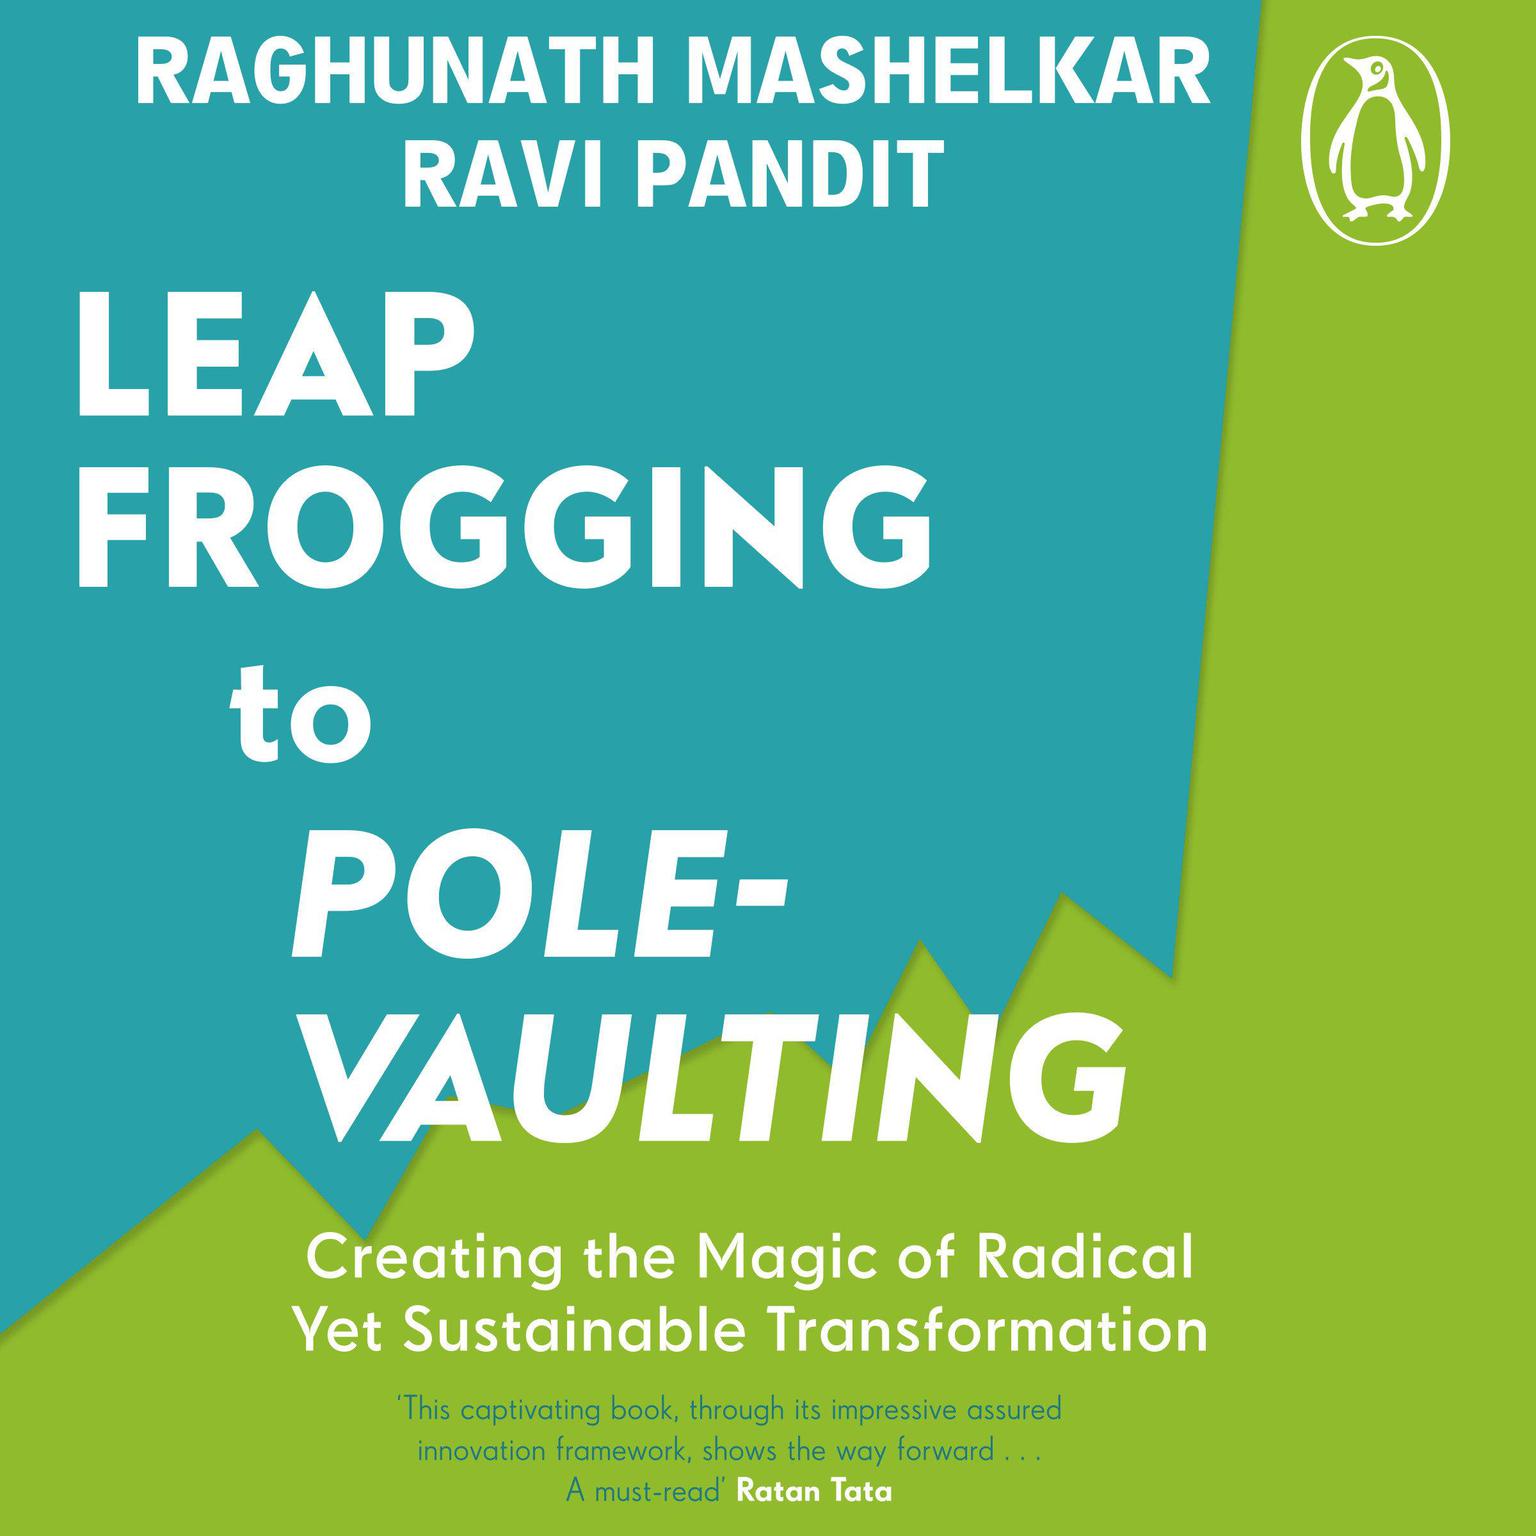 From Leapfrogging to Pole-Vaulting Audiobook, by R.A. Mashelkar